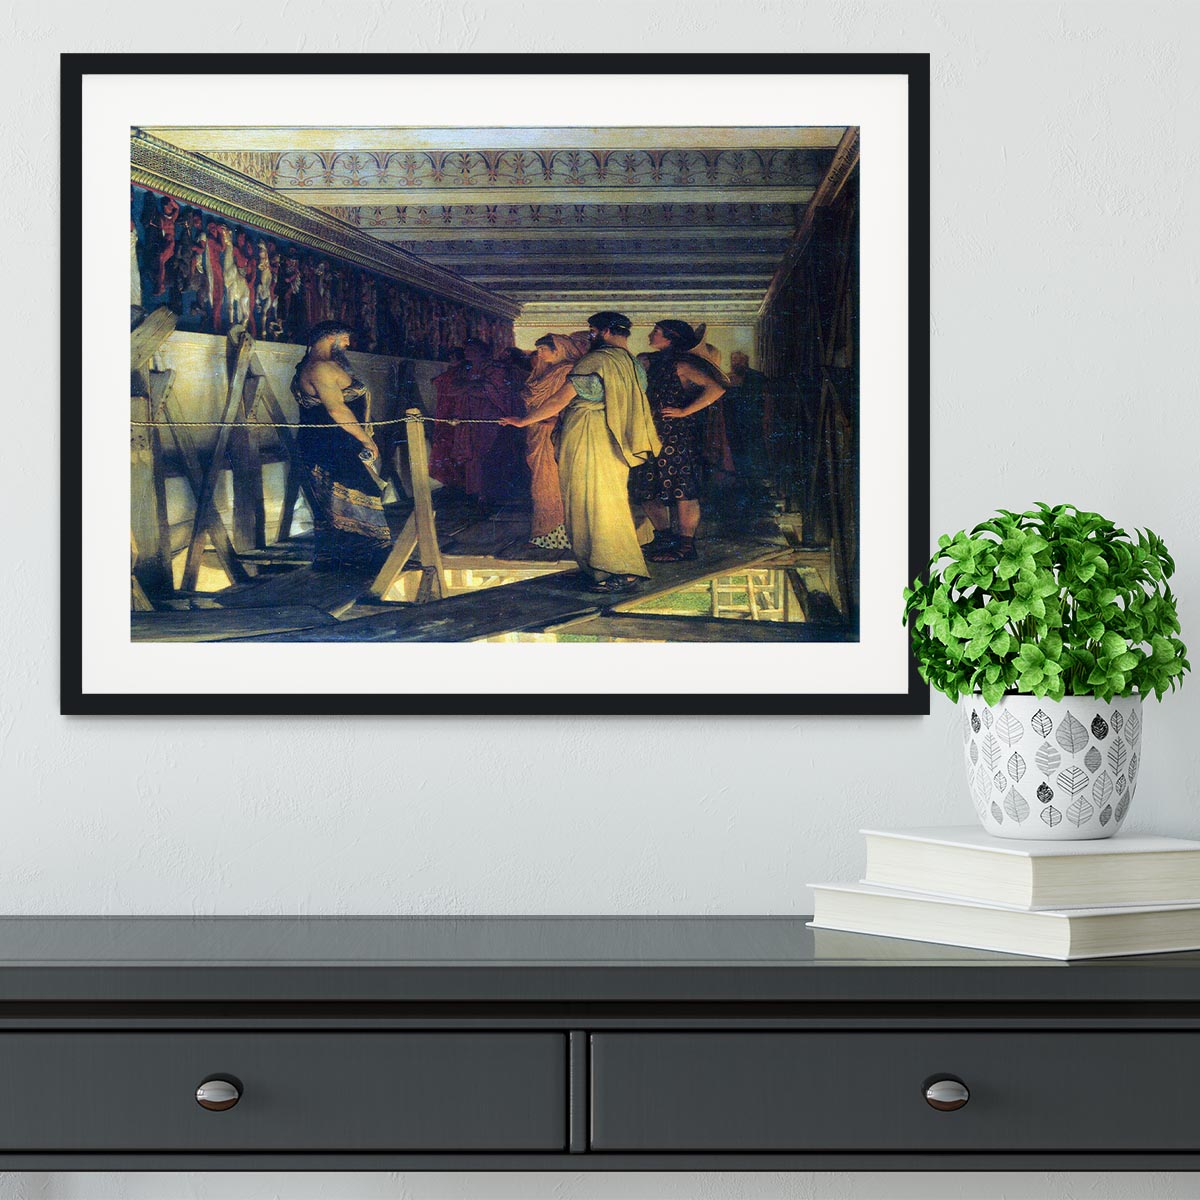 Phidias shows his friends from the Parthenon frieze detail by Alma Tadema Framed Print - Canvas Art Rocks - 1